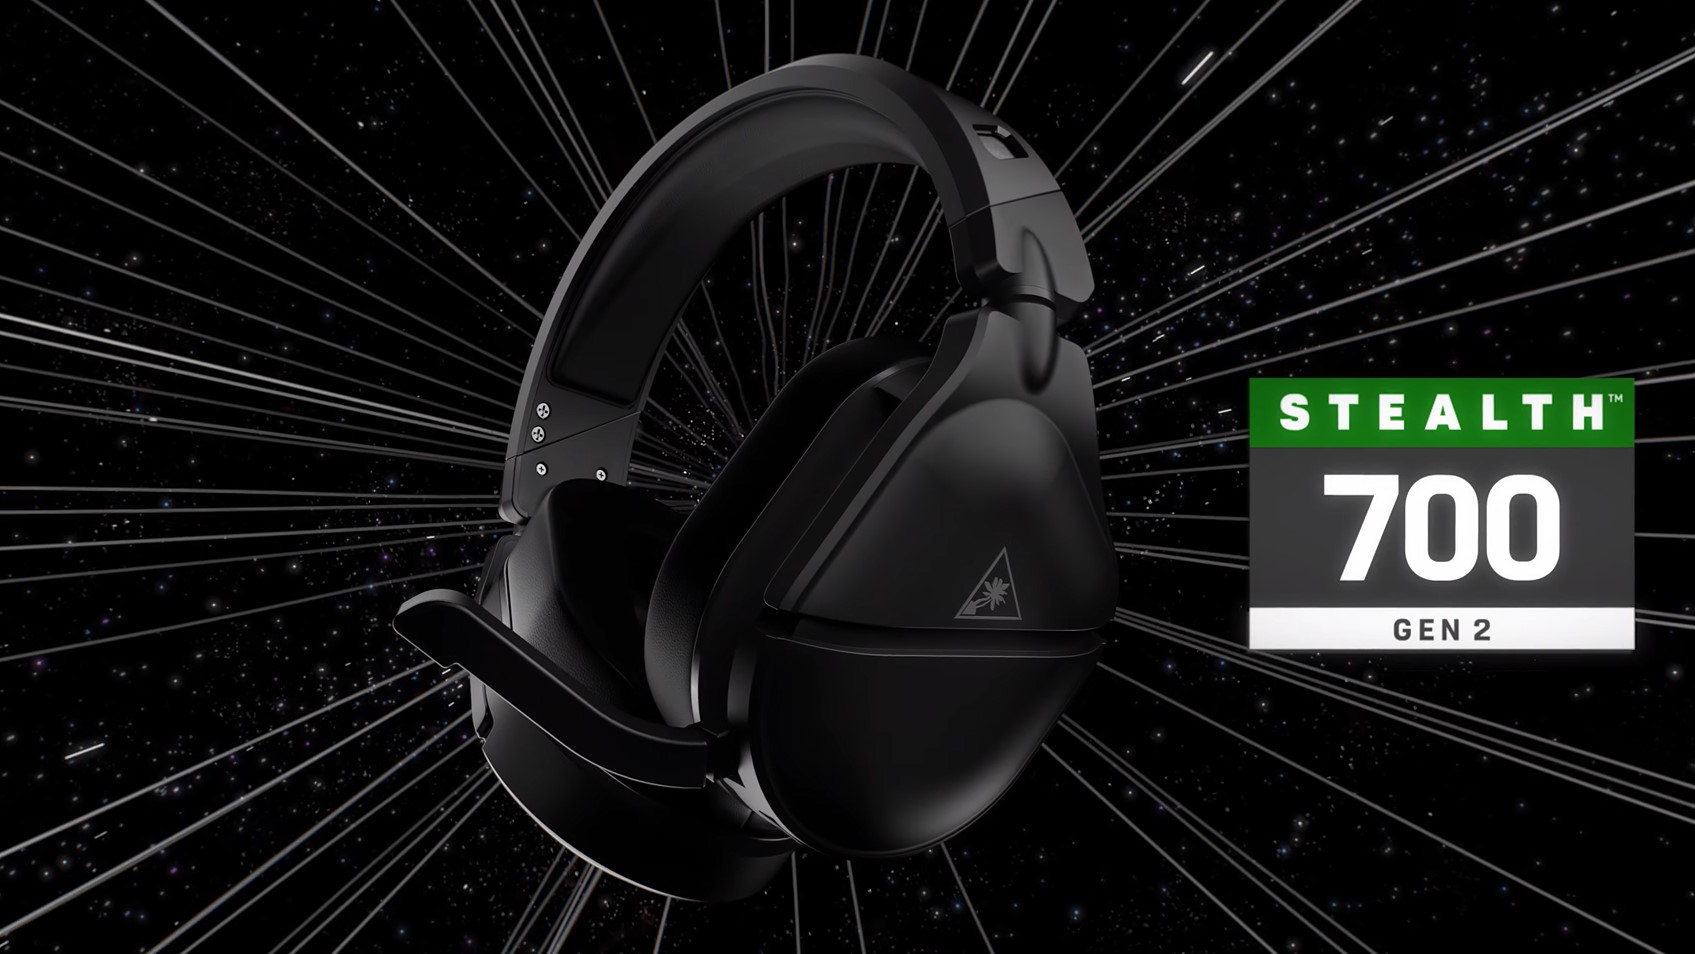 wildernis Matig draad These gaming headset deals offer lowest ever prices on two of our favorite Turtle  Beach sets | GamesRadar+